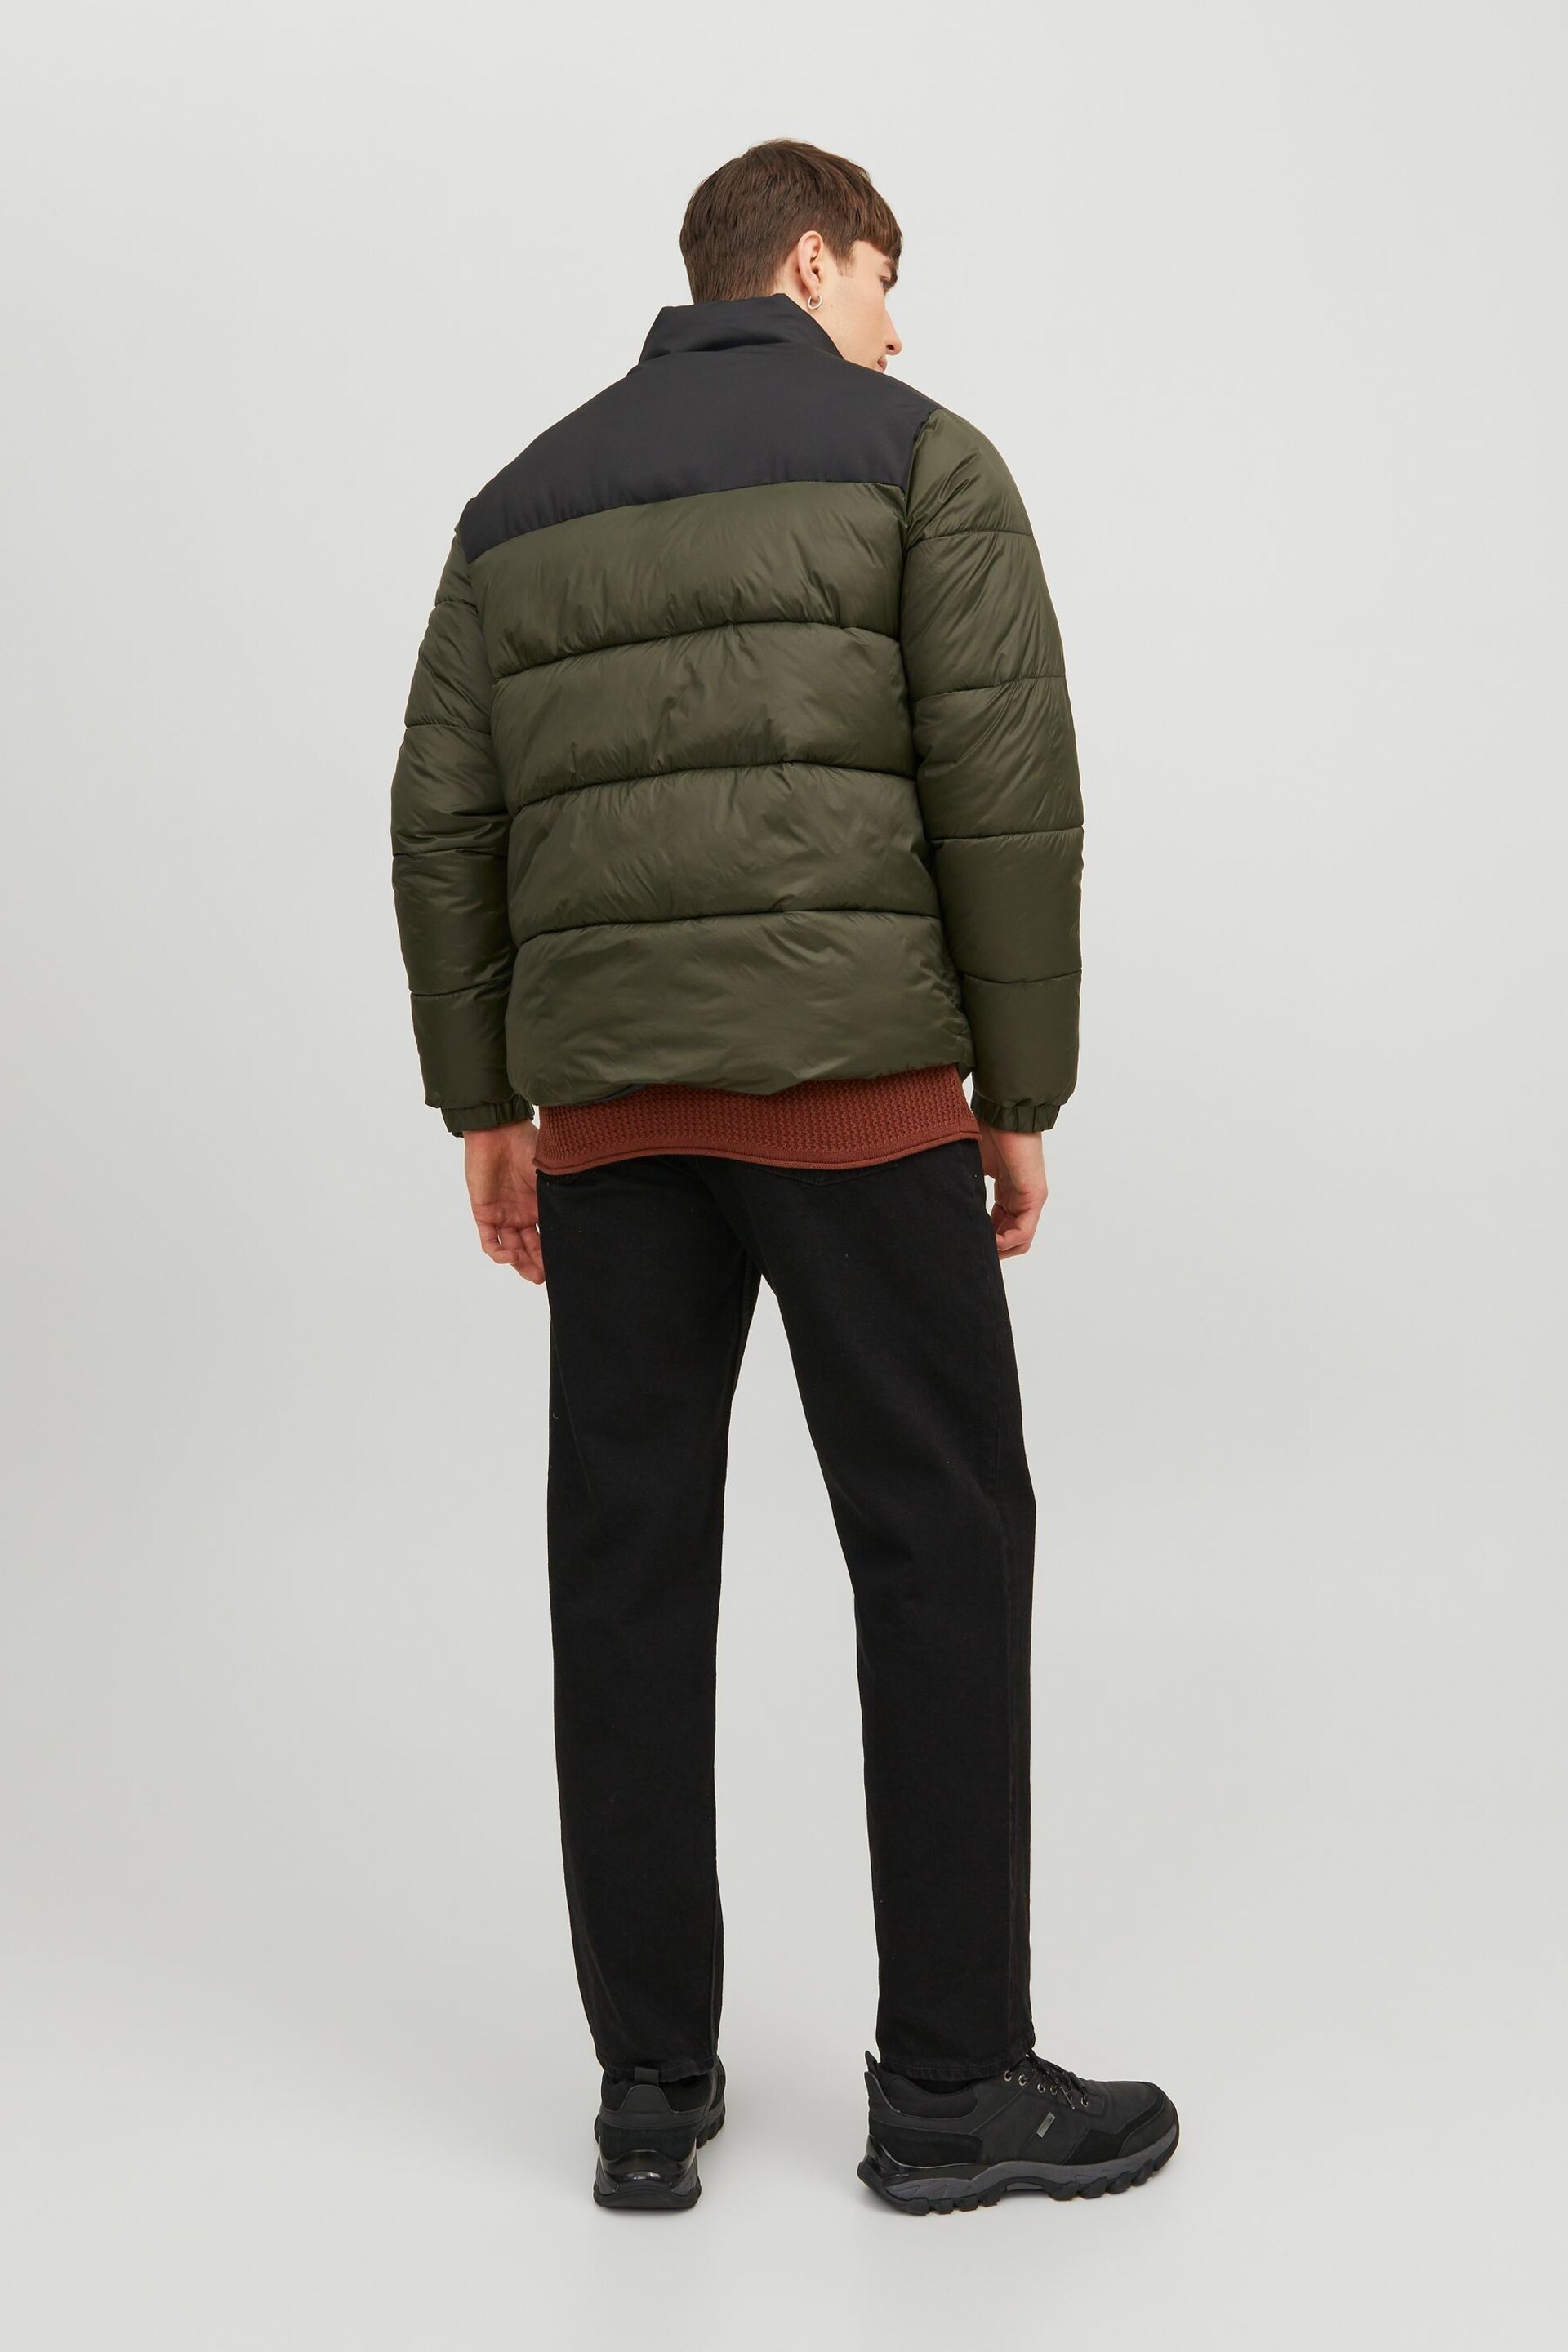 JACK & JONES Green Quilted Padded Collarless Jacket - Image 2 of 5